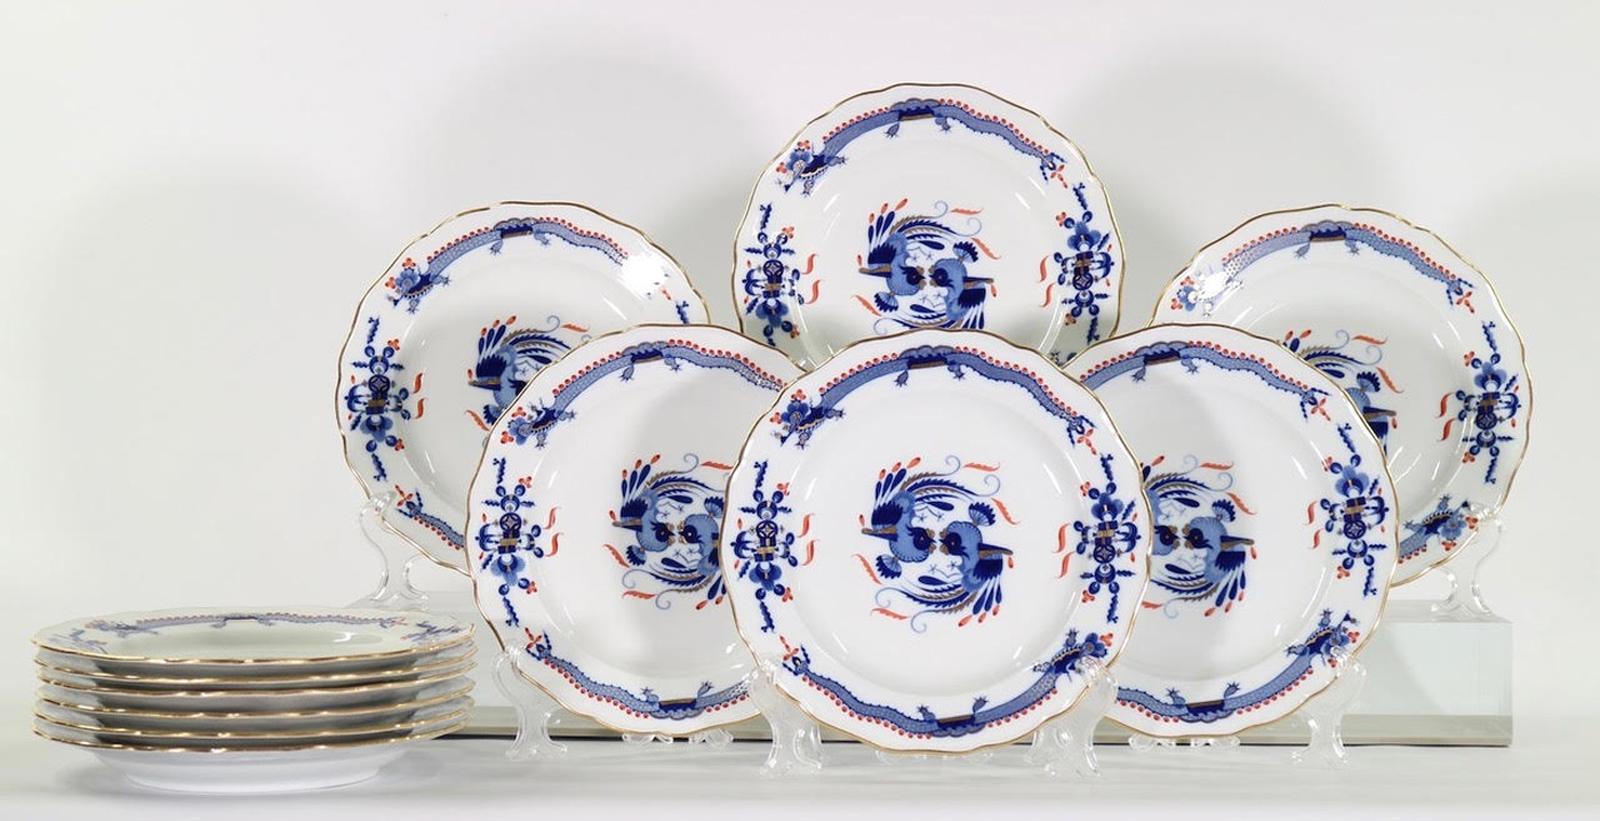 Set of twelve scalloped porcelain dinner plates in a Blue Dragon pattern, made by Meissen in Germany. The plates have decorative gold accents and date from the early 20th century. In mint condition with no scratches.